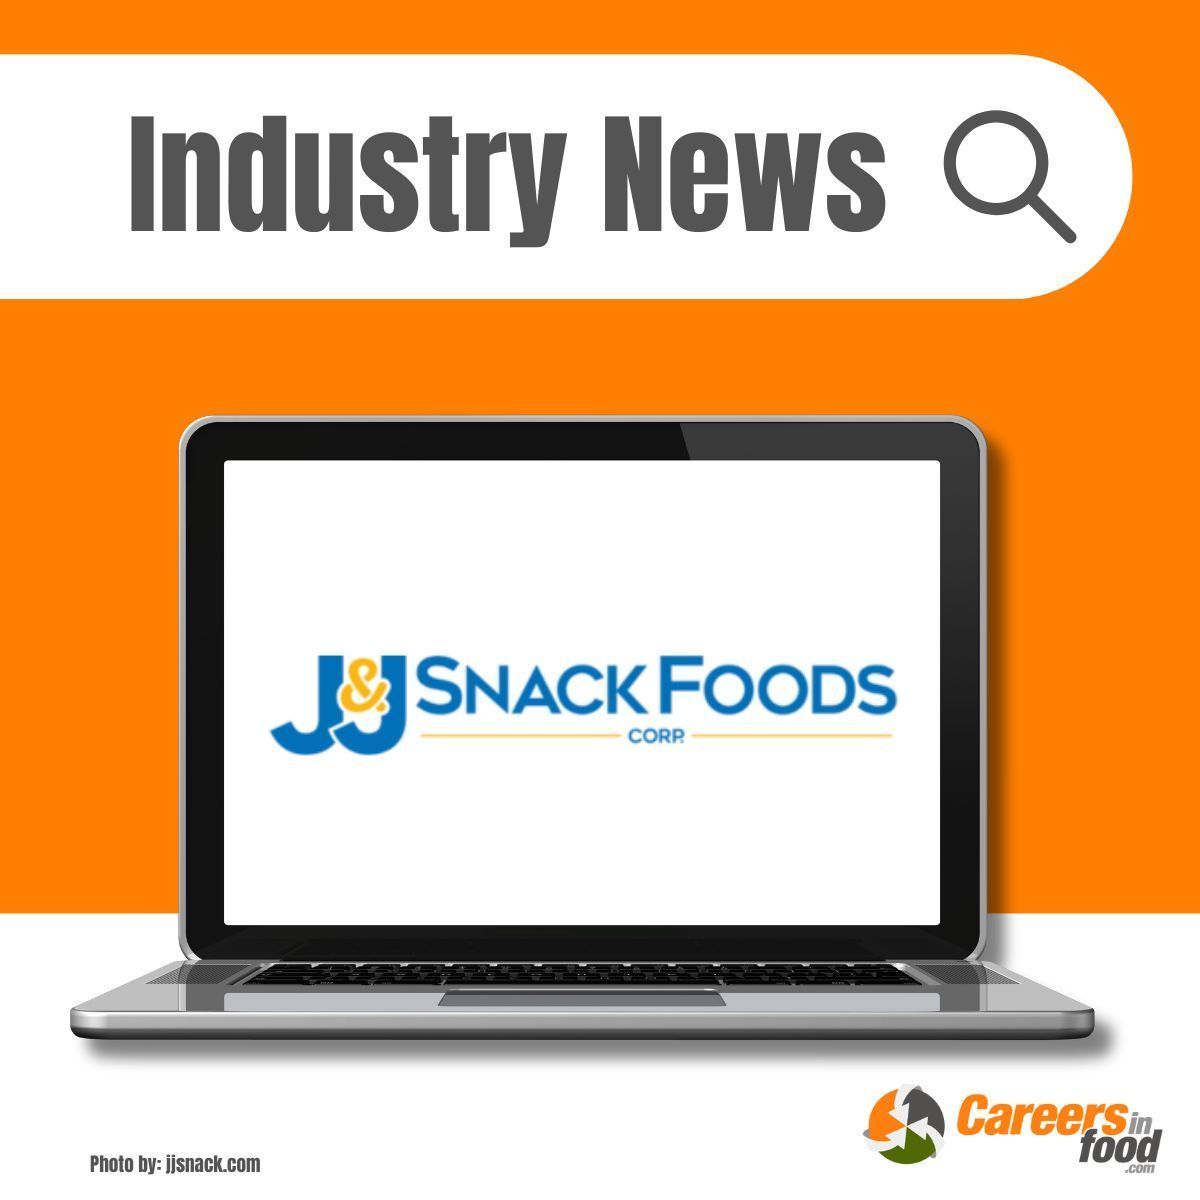 J&J Snack Foods Acquires Thinsters Cookies!

The acquisition of Thinsters marks another milestone in the company's history of strategic growth and brand diversification.

More on this acquisition: careersinfood.com/career-plannin… 

#FoodNews #Cookies #Snacks #Acquisition